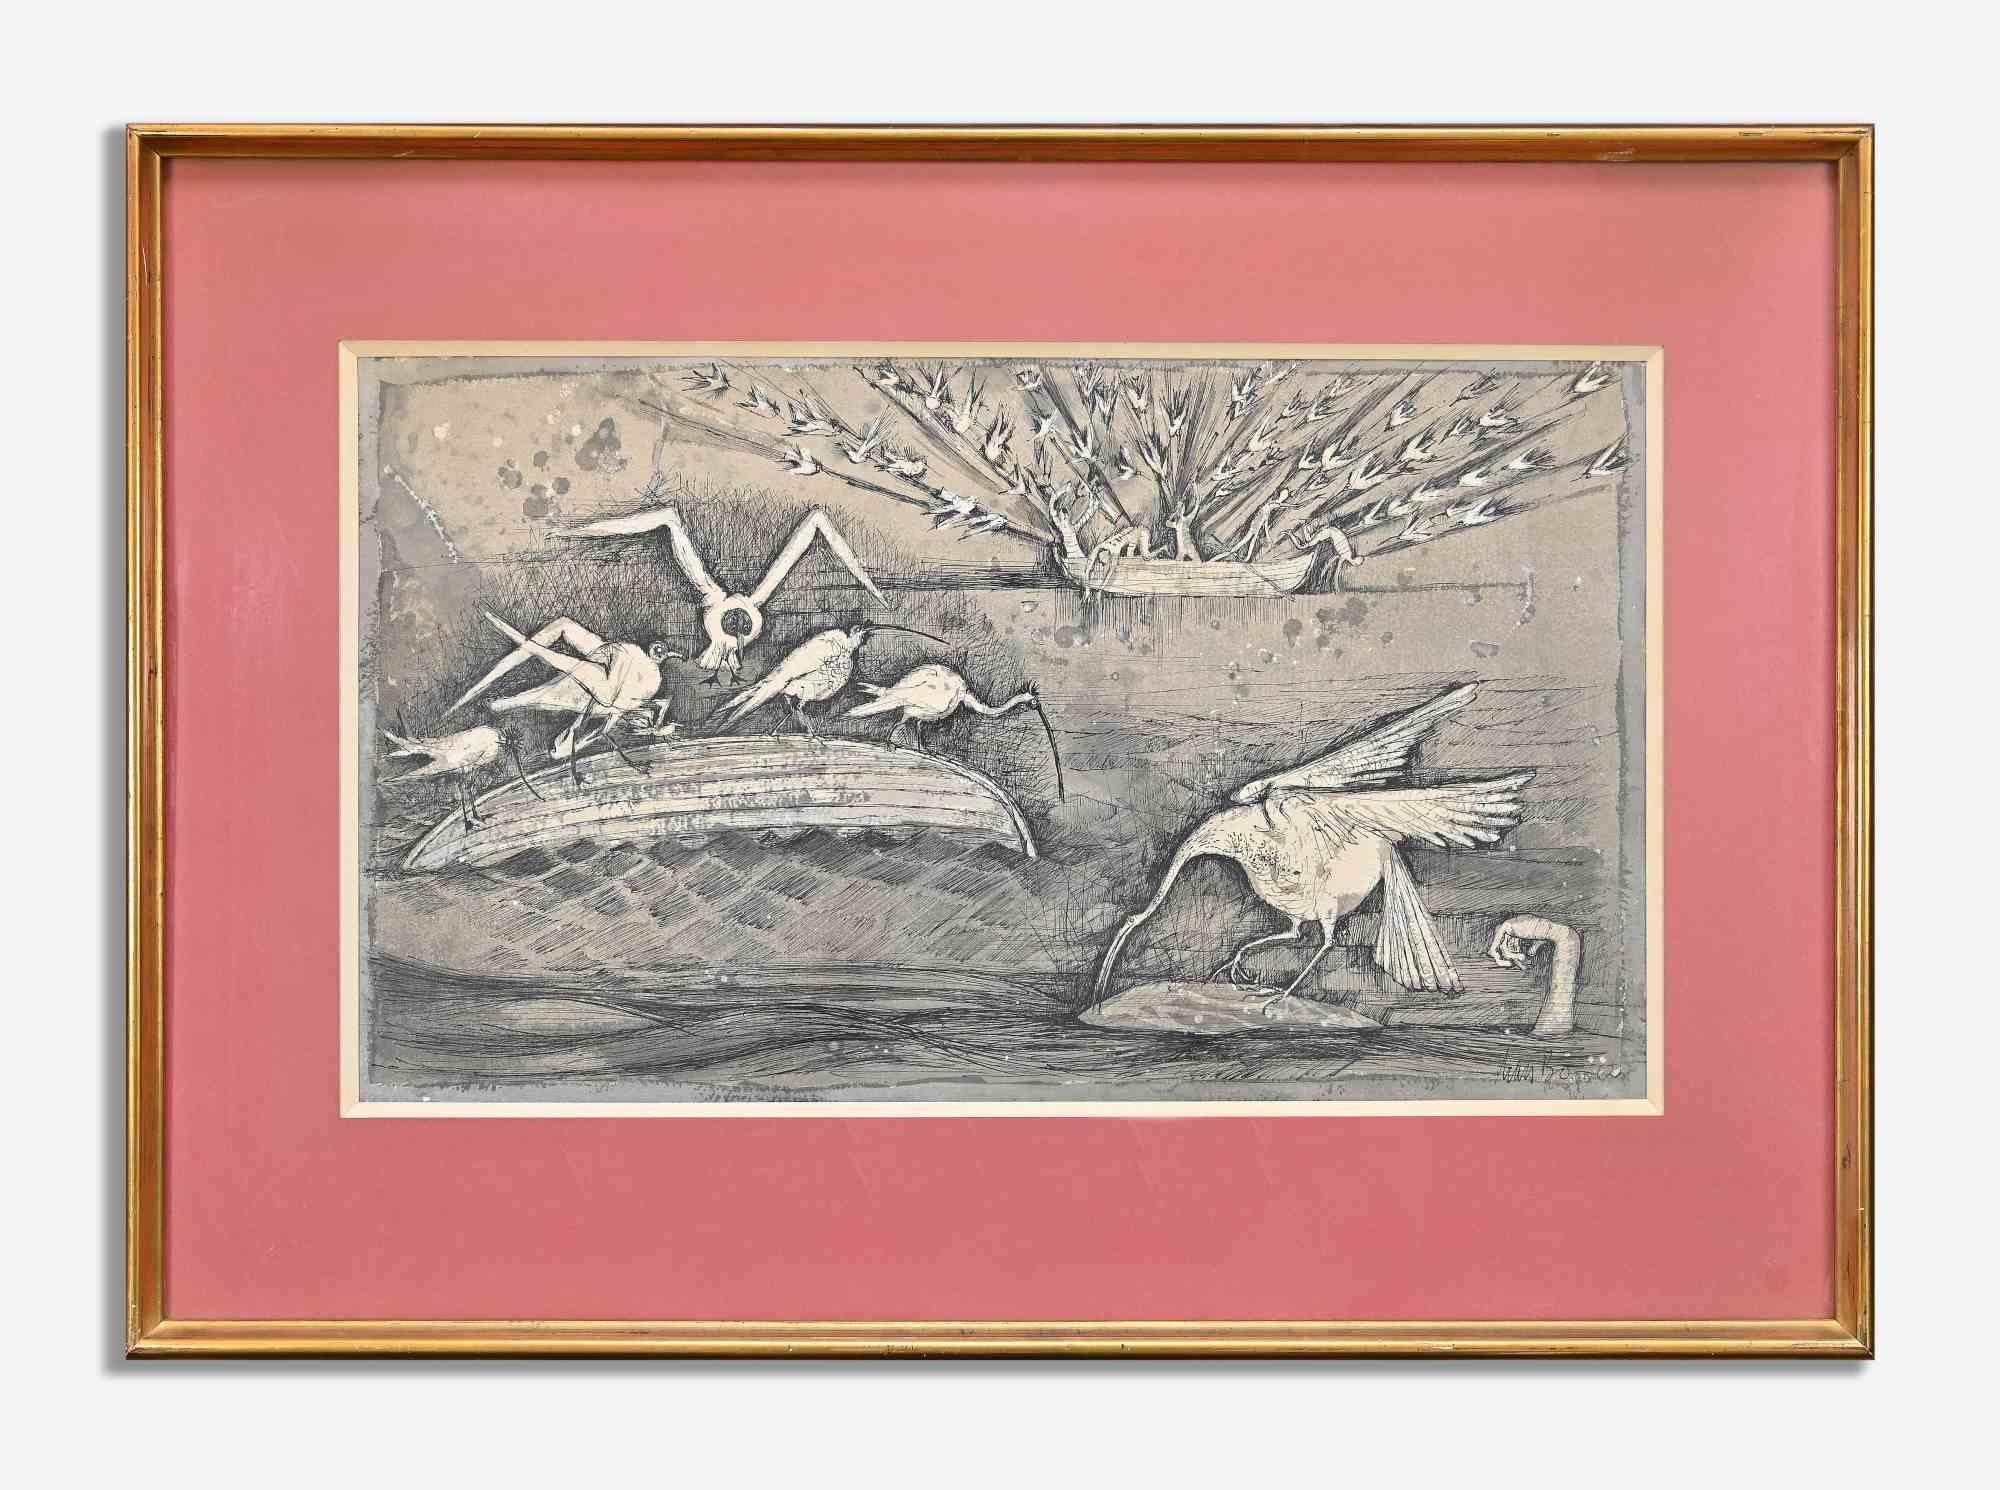 The hunt is an original moder artwork realized by Lars Bo in 1962.

Watercolored china on paper.

Hand signed and dated on the lower right margin.

Hand wrtitten notes on the back

Includes frame: 48.5 x 1 x 68 cm

Lars Bo (29 May 1924 in Kolding –